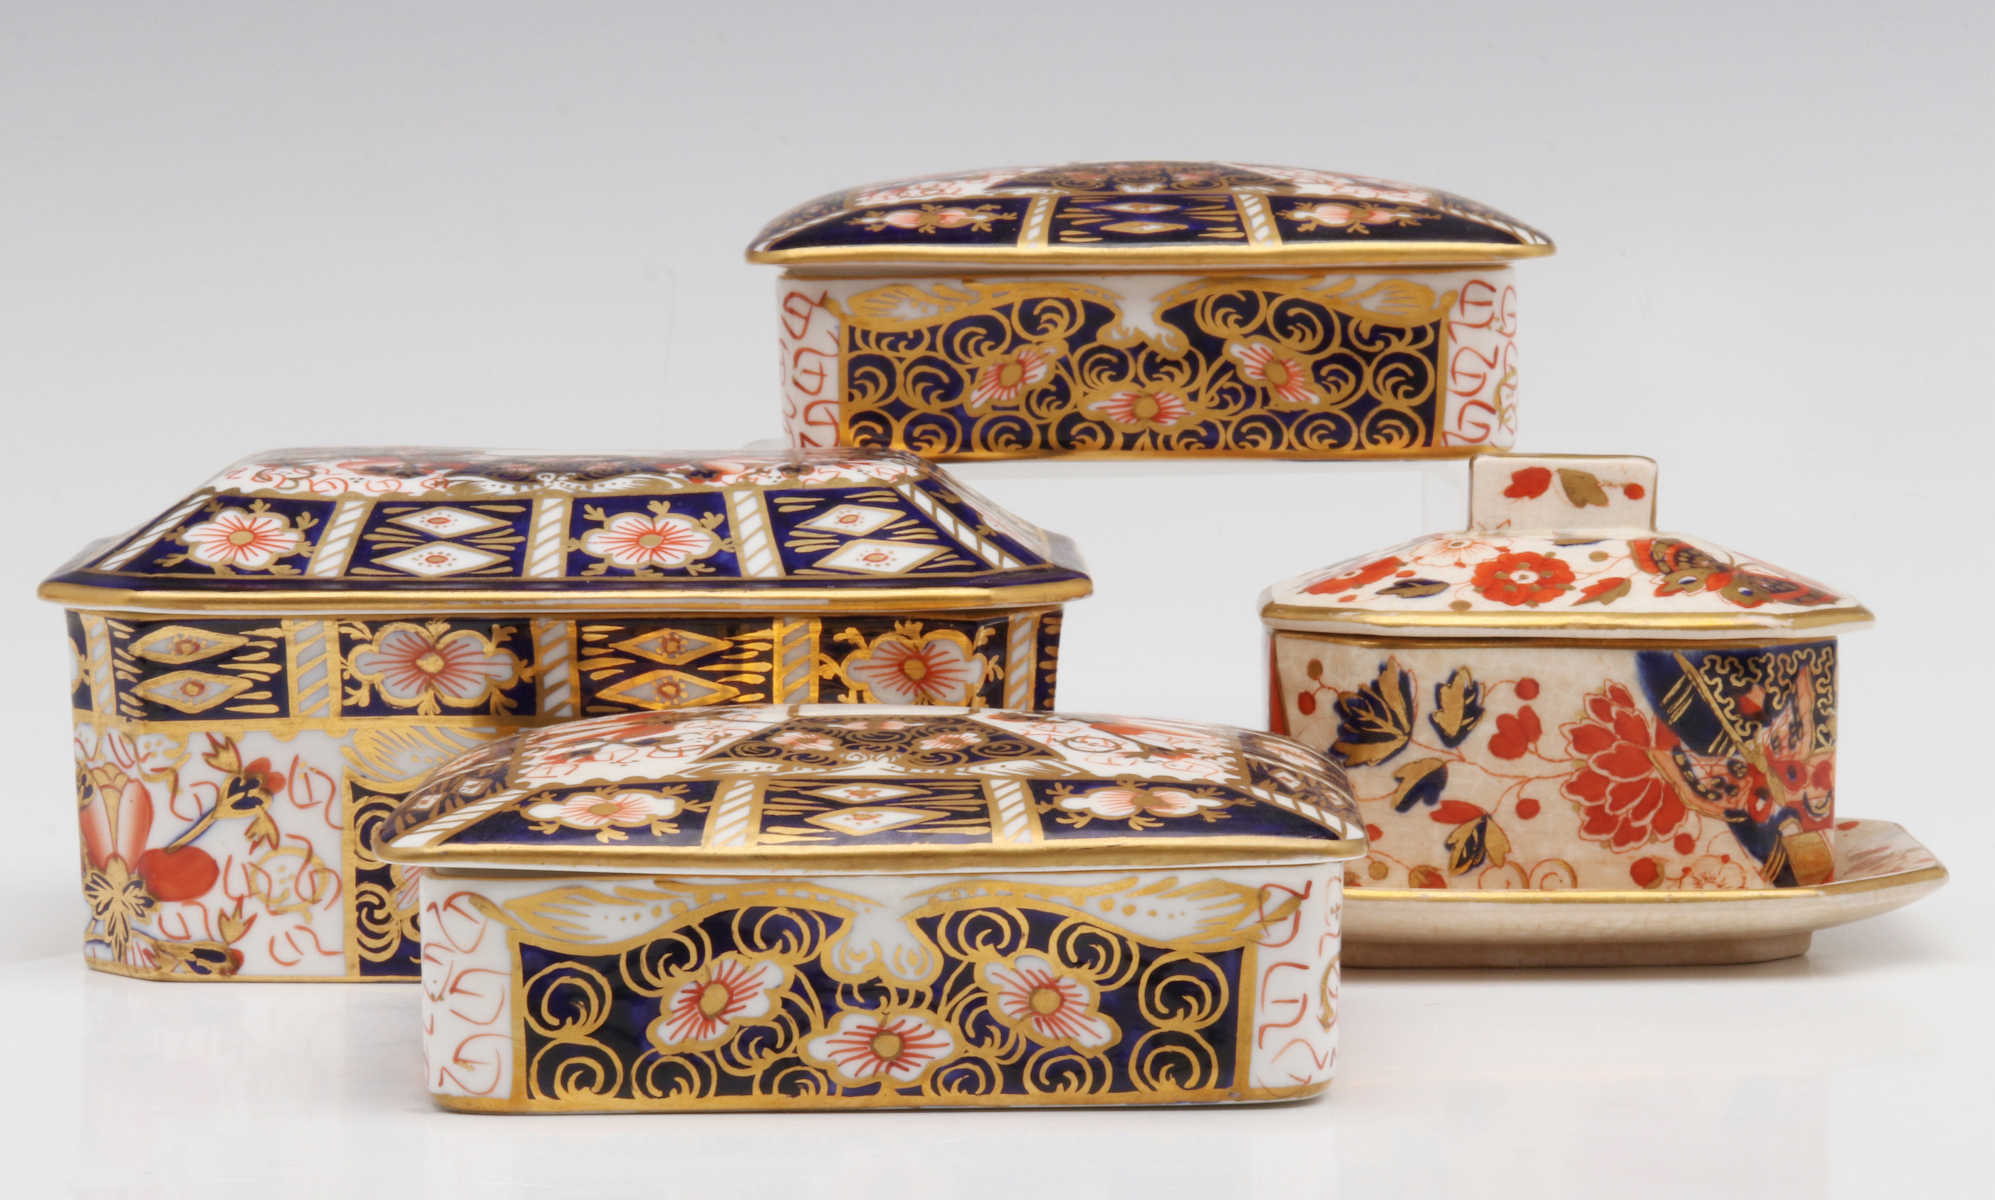 ROYAL CROWN DERBY COVERED BOXES AND SIMILAR TUREENS